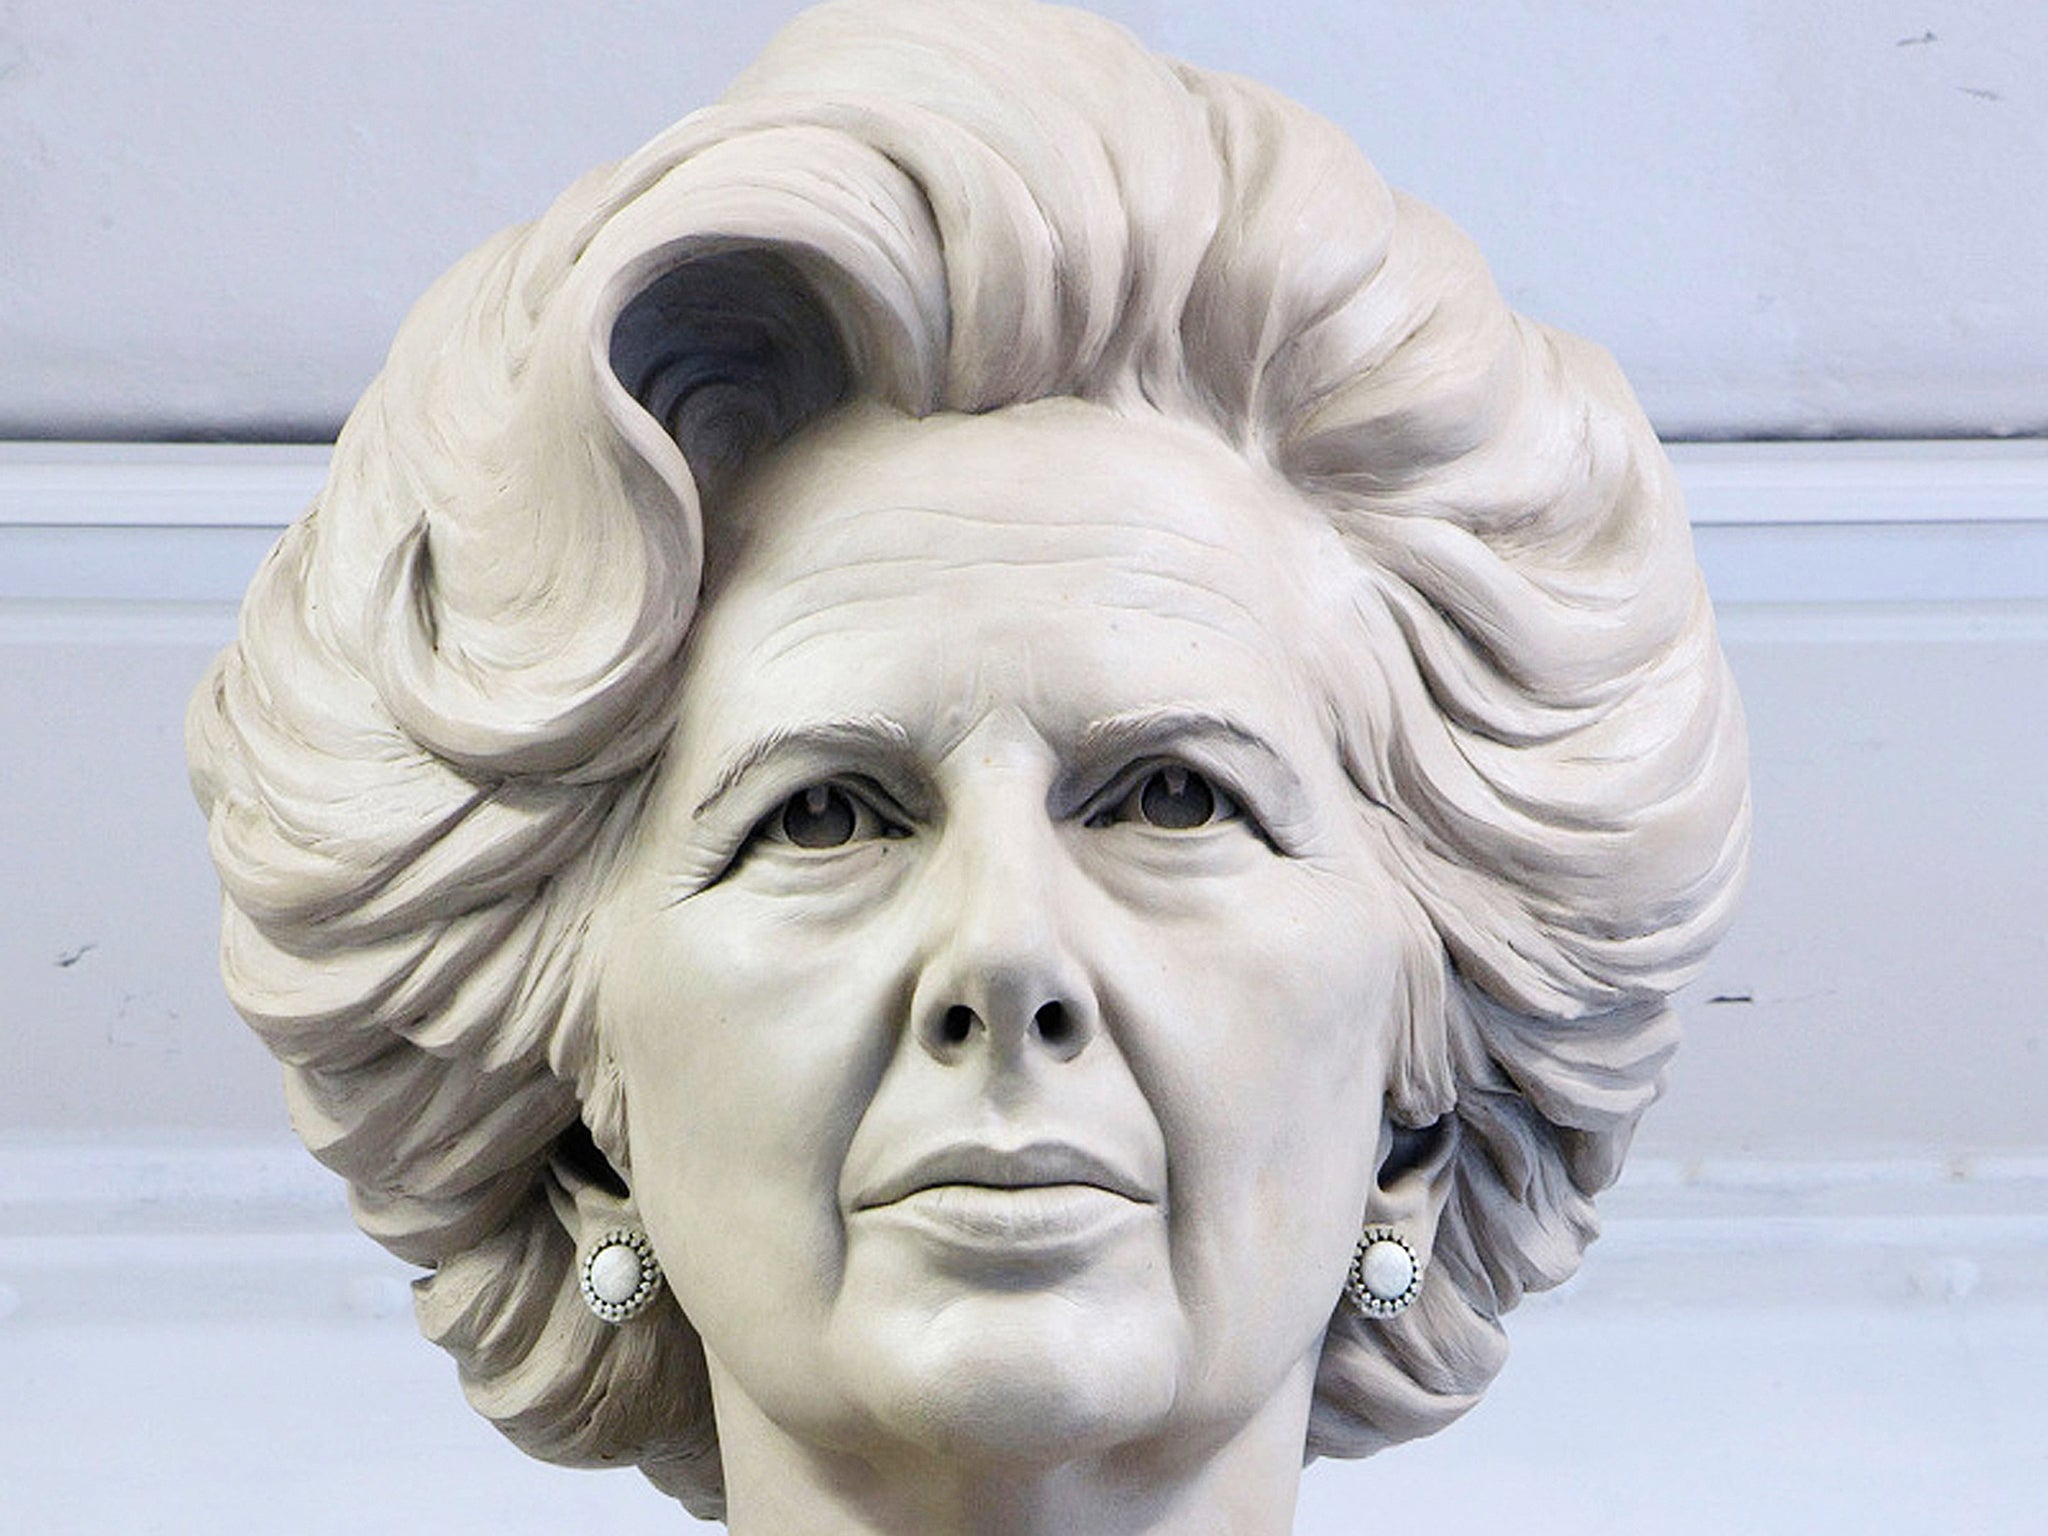 Many oppose a proposal to erect a new statue of Margaret Thatcher in Parliament Square